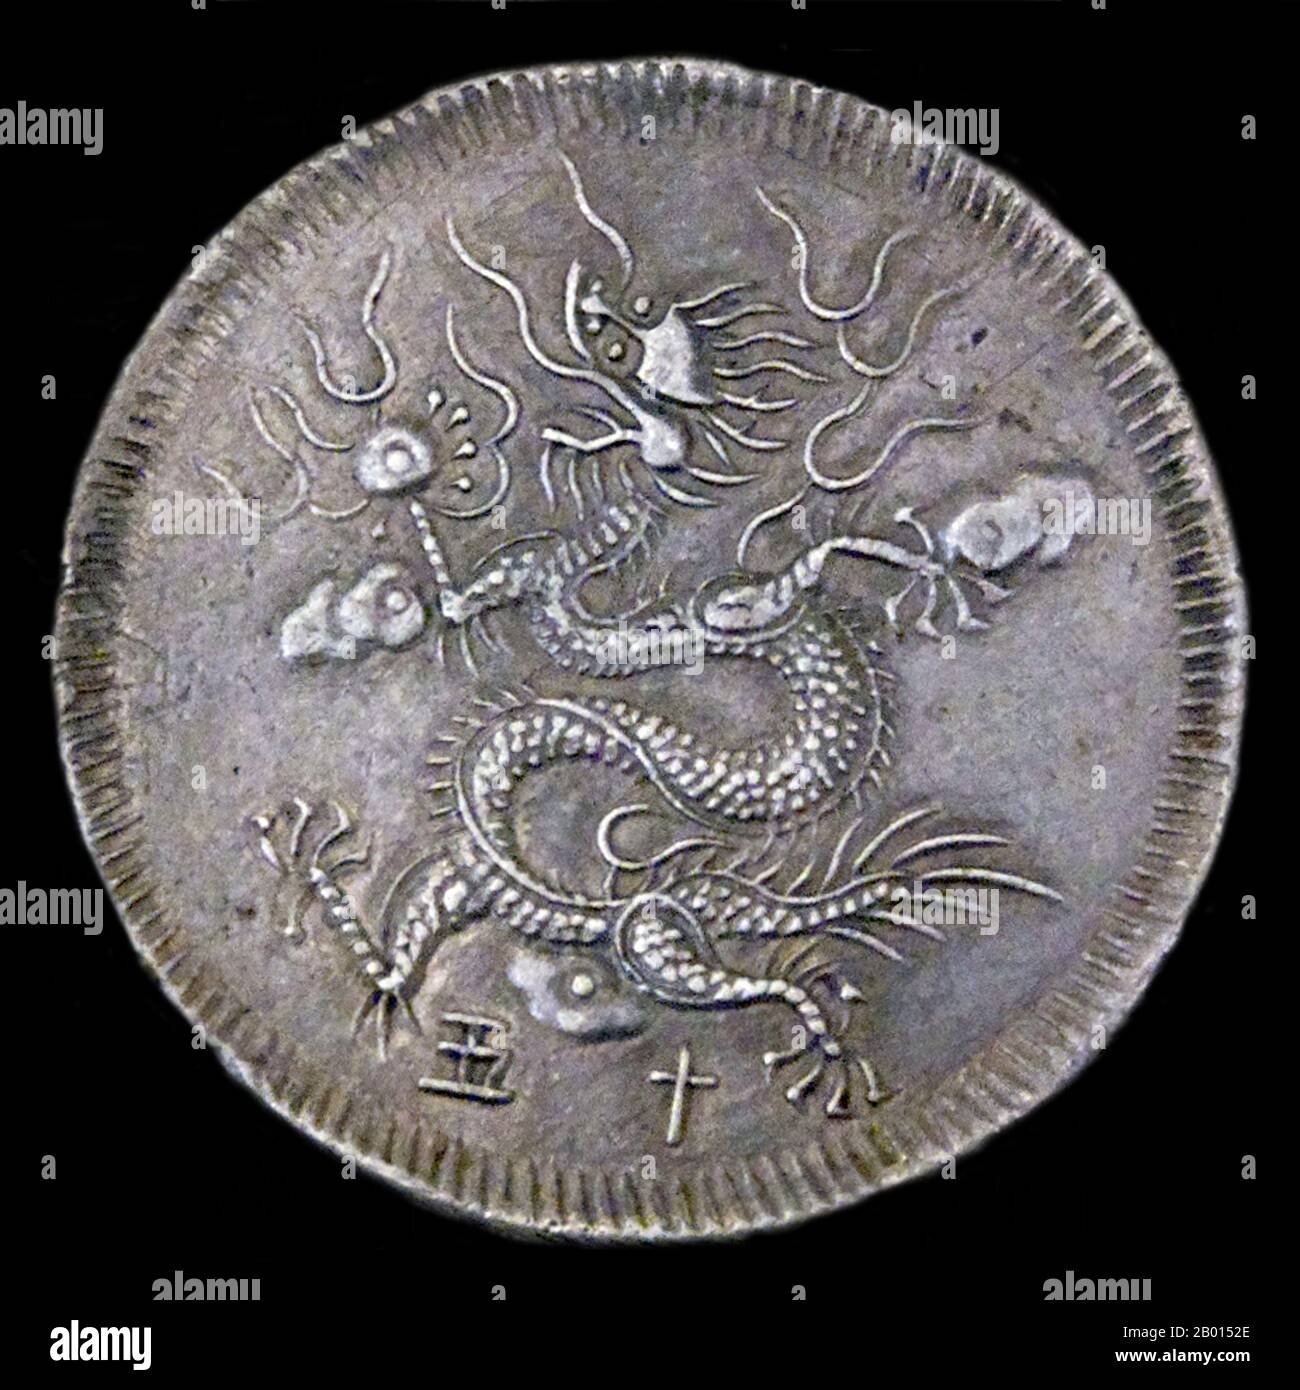 Vietnam: A phi long (flying dragon) silver coin of Minh Mang, second emperor of the Nguyen Dynasty (r.1820-1841), minted 1833. Photo by Marie-Lan Nguyen (CC BY-2.5 License).  Minh Mạng (1791–1841) was the second emperor of the Nguyen Dynasty of Vietnam. He was a younger son of Emperor Gia Long, whose eldest son, Crown Prince Canh, had died in 1801. He was well known for his opposition to French involvement in Vietnam and his rigid Confucian orthodoxy. Minh Mang was a classicist who was regarded as one of Vietnam's most scholarly monarchs. He cared sincerely about his country, micromanaging it. Stock Photo